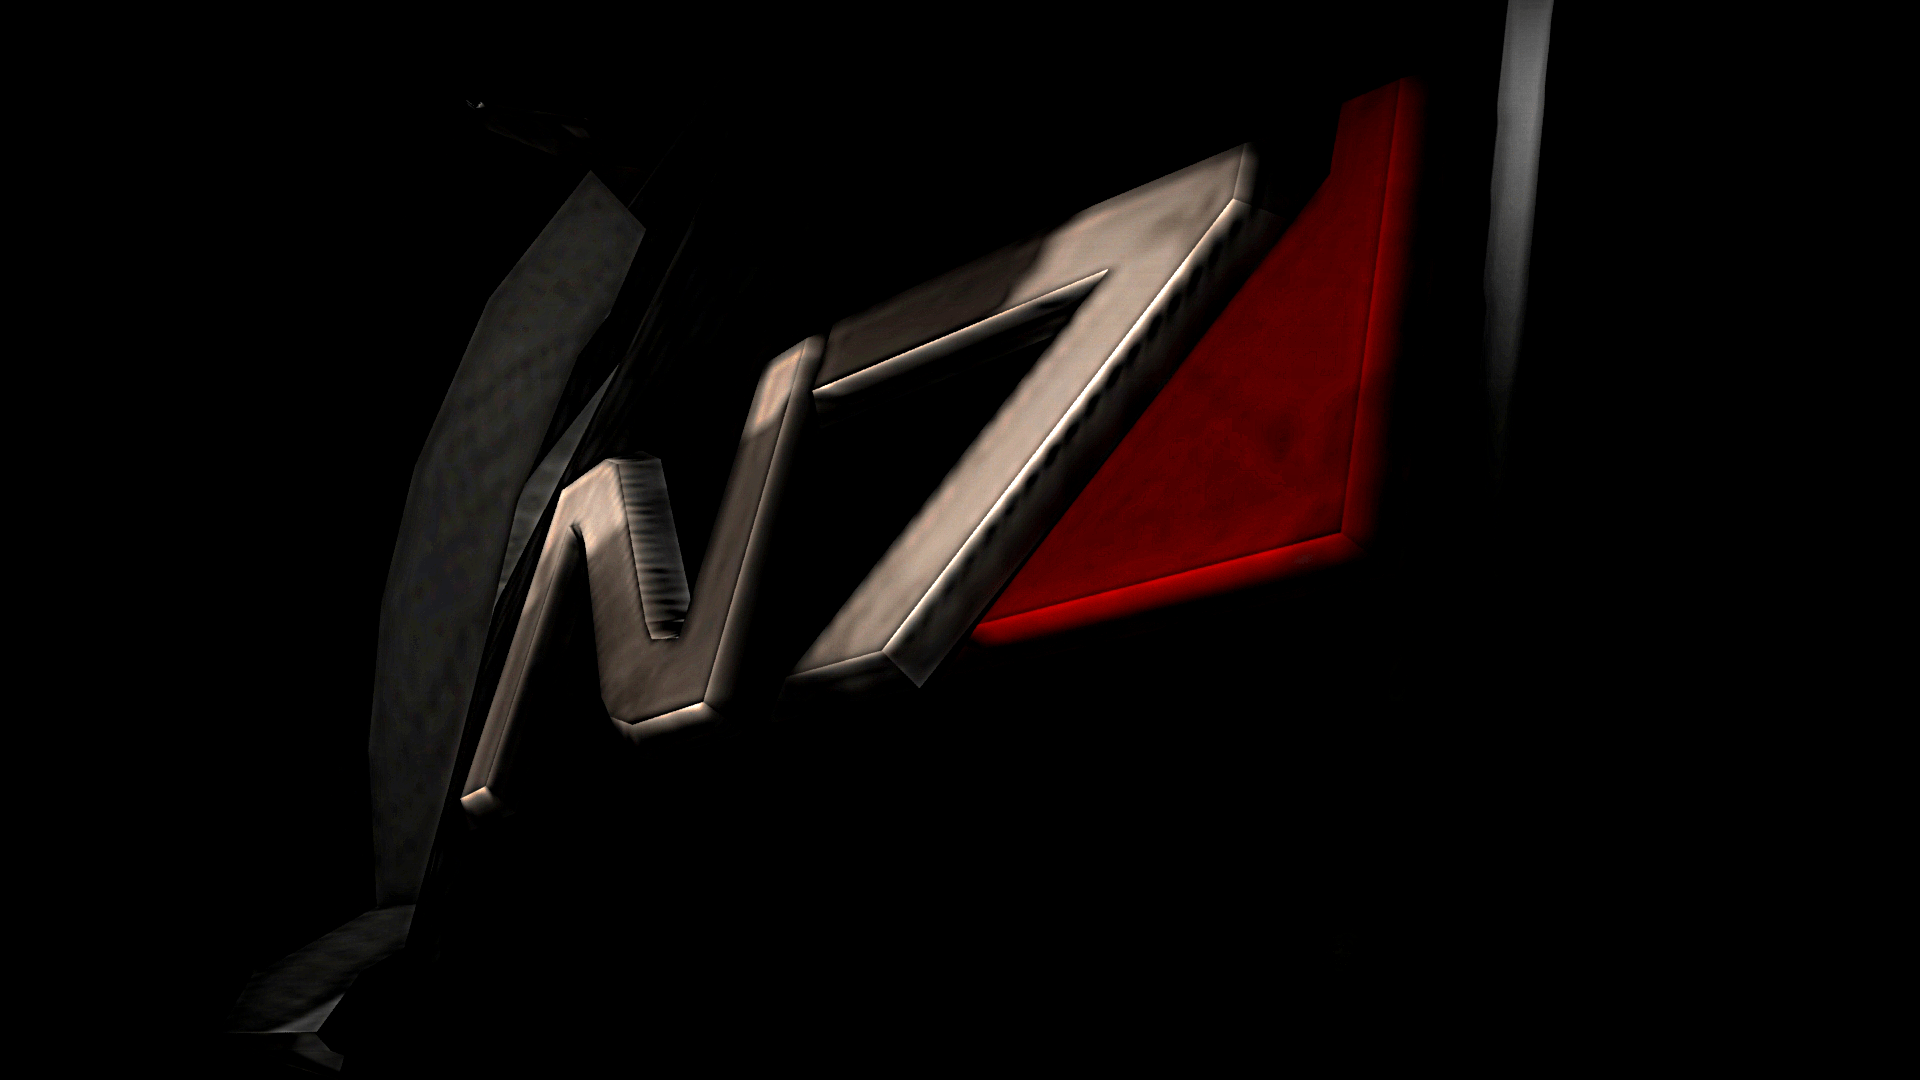 N7 Forever. By Spartan 279